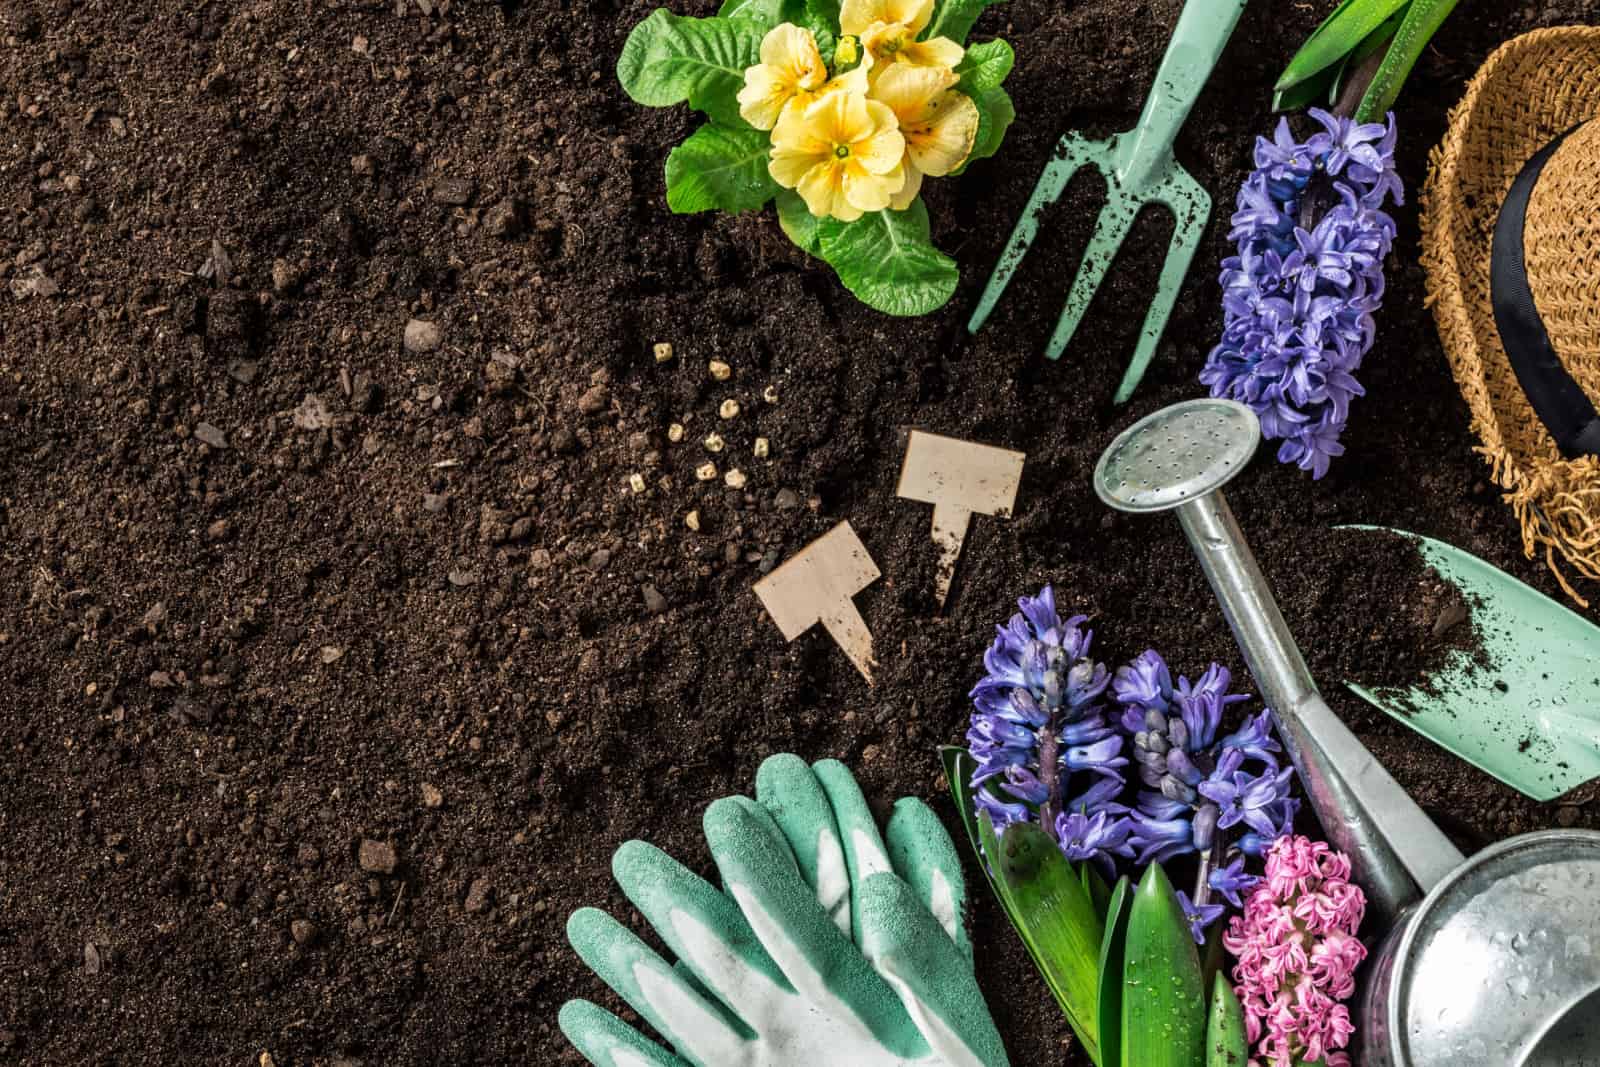 Gardening tools, hyacinth flowers, watering can and straw hat on soil background